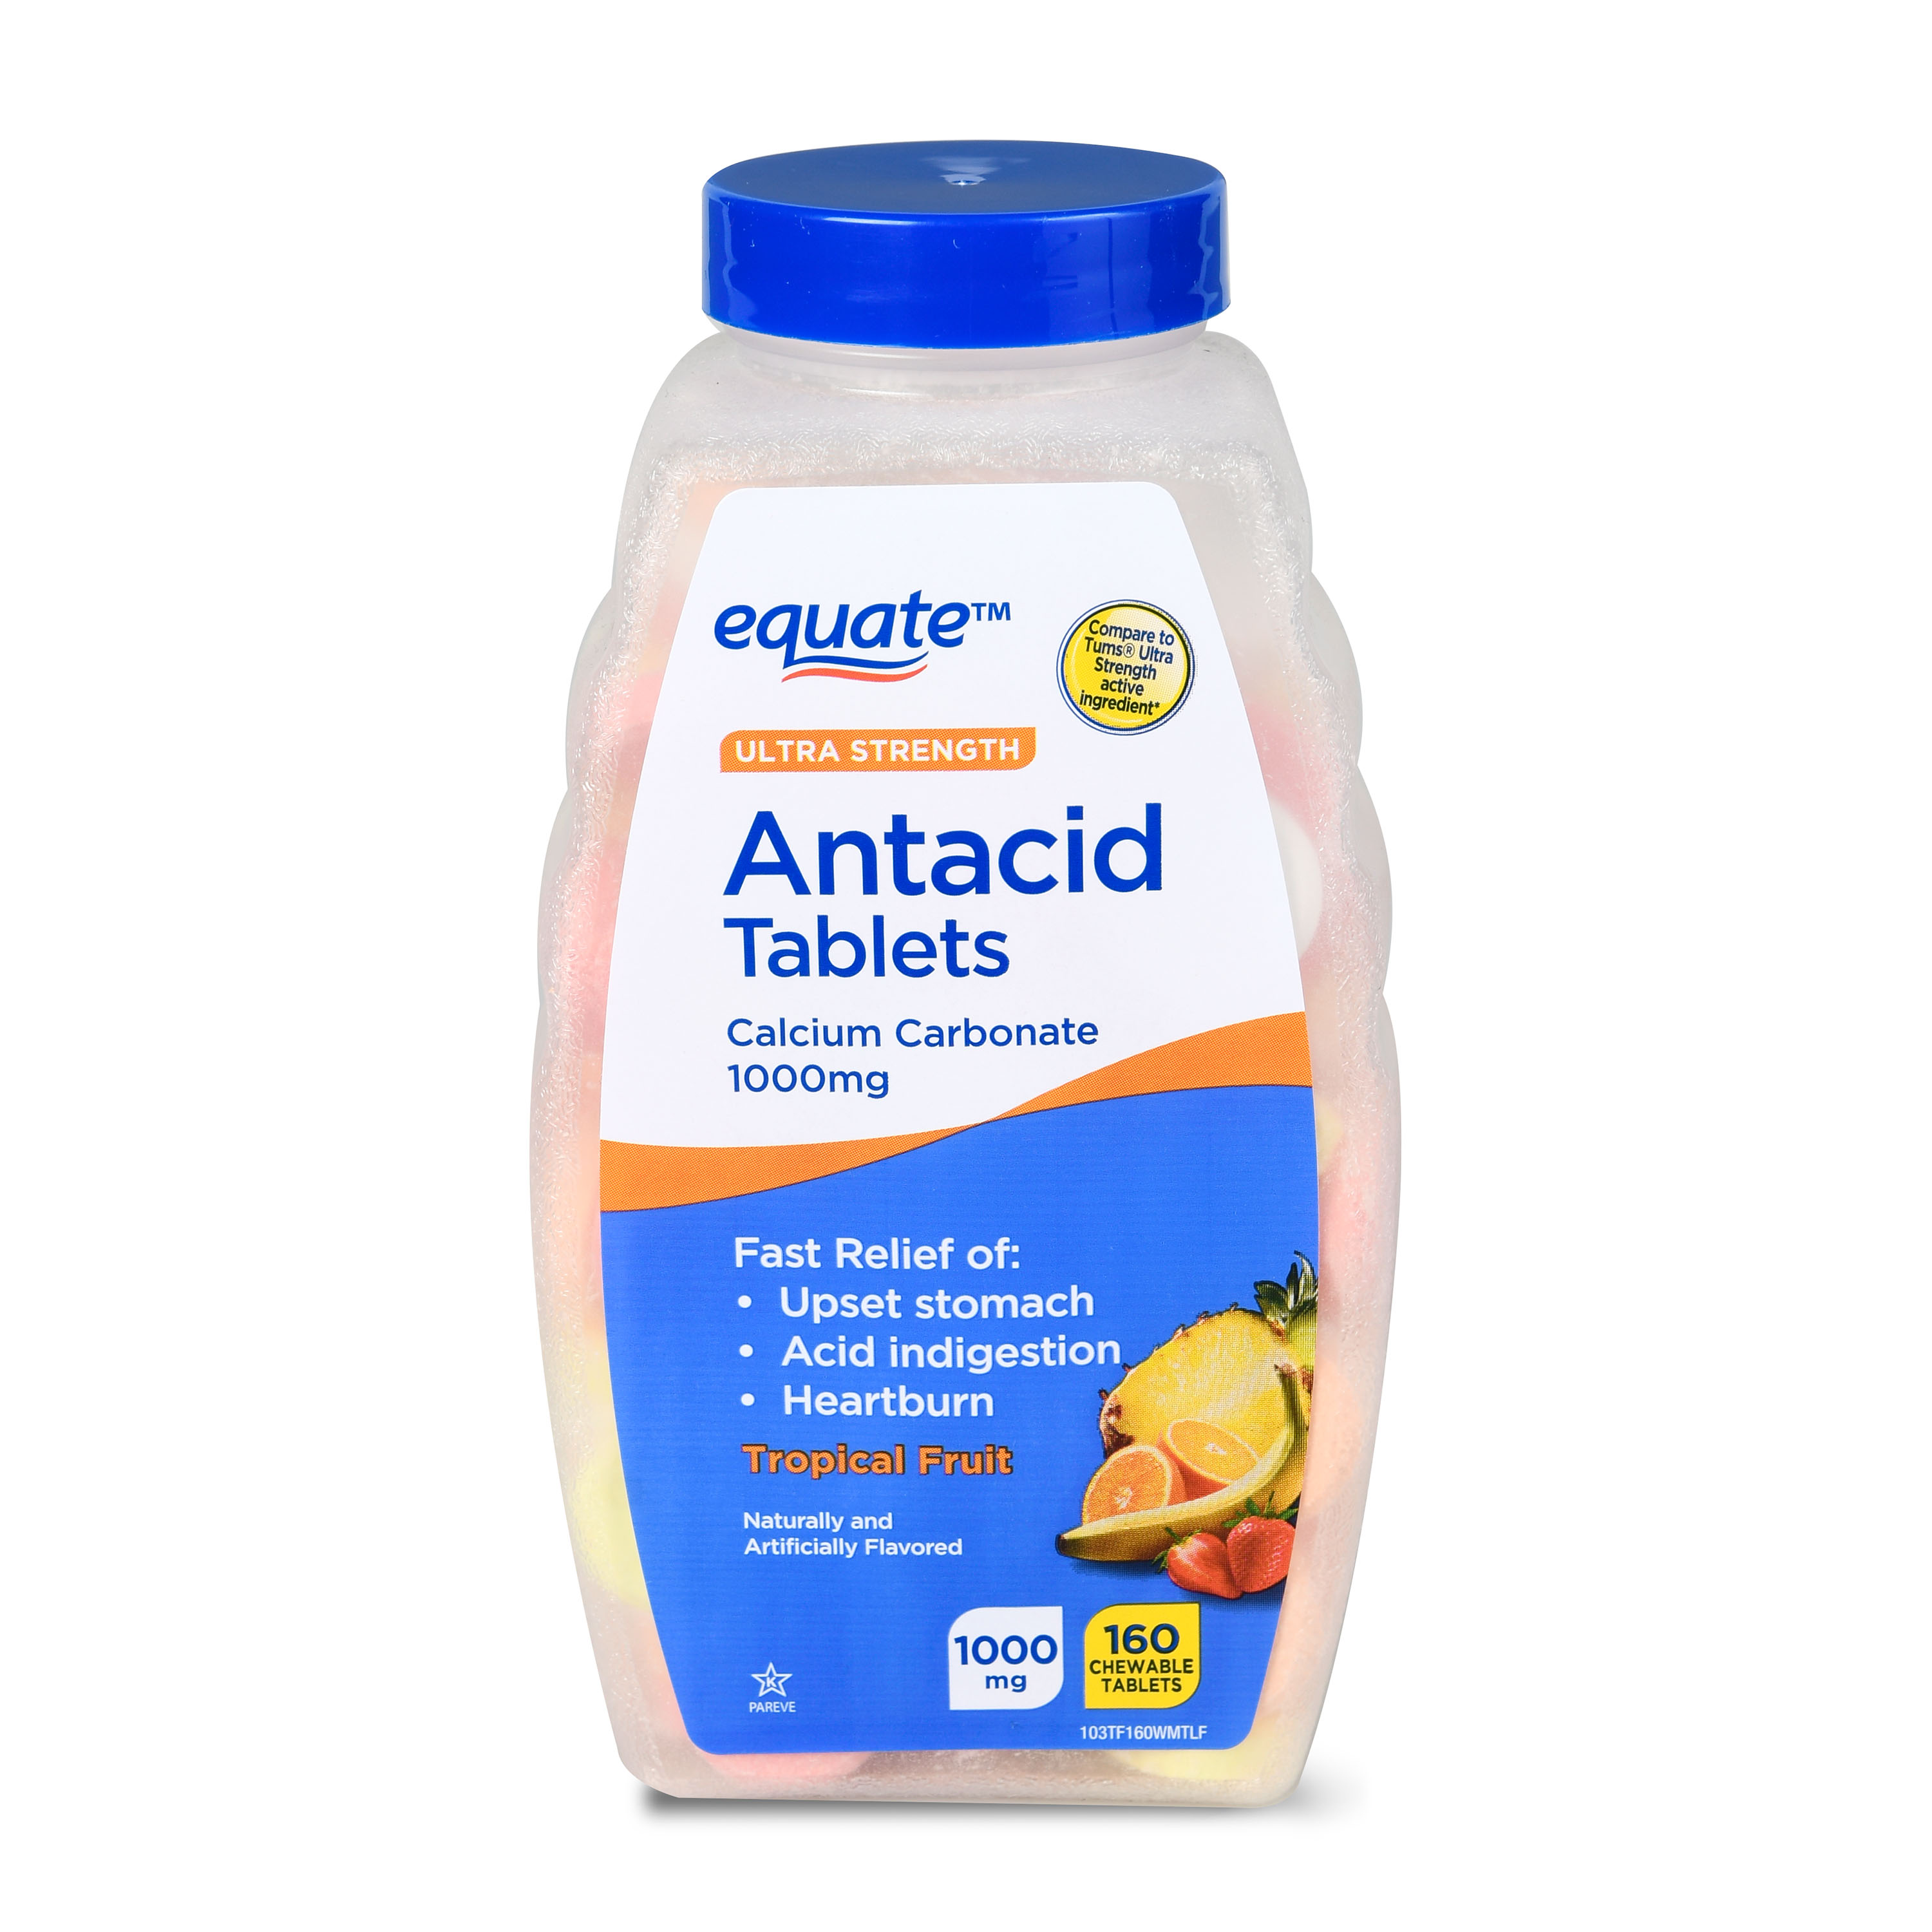 Equate Ultra Strength Antacid Tropical Fruit Chewable Tablets, 1000 mg, 160 Count - image 1 of 11